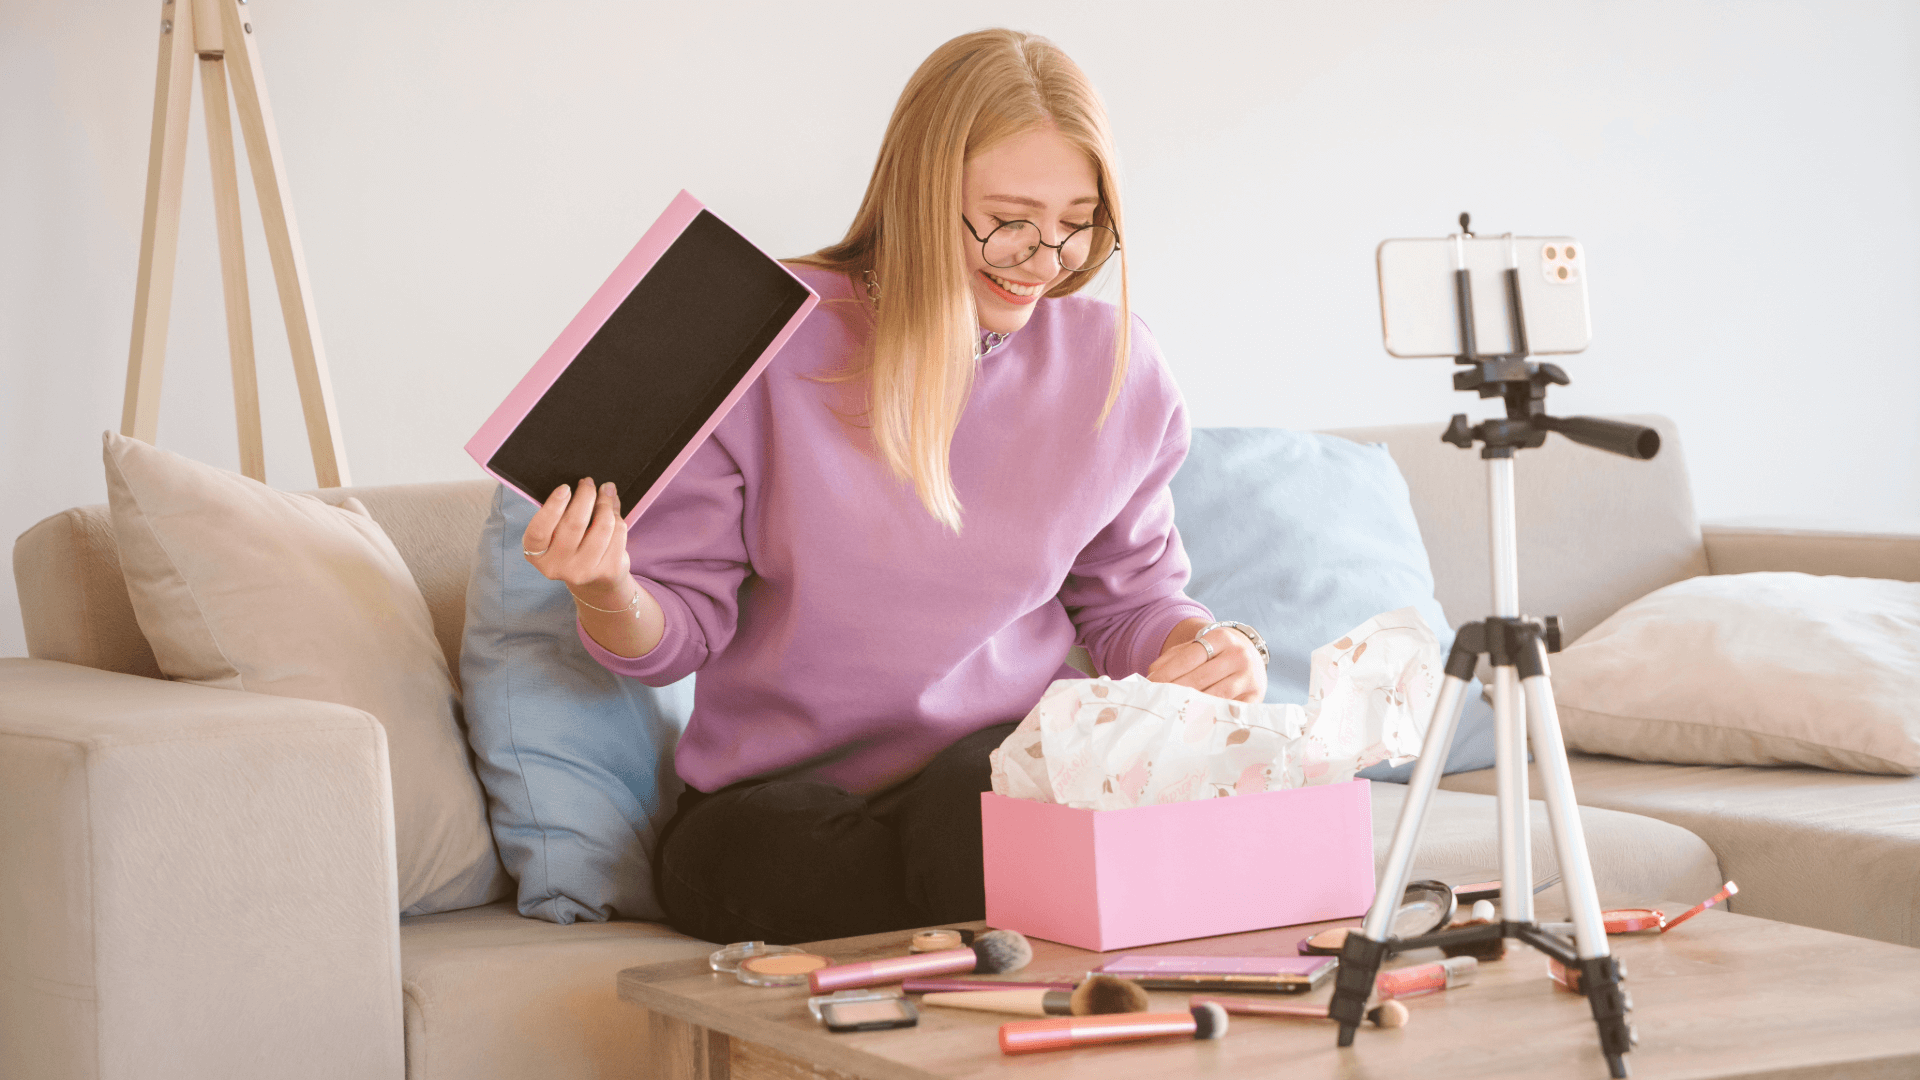 a lady making an unboxing video